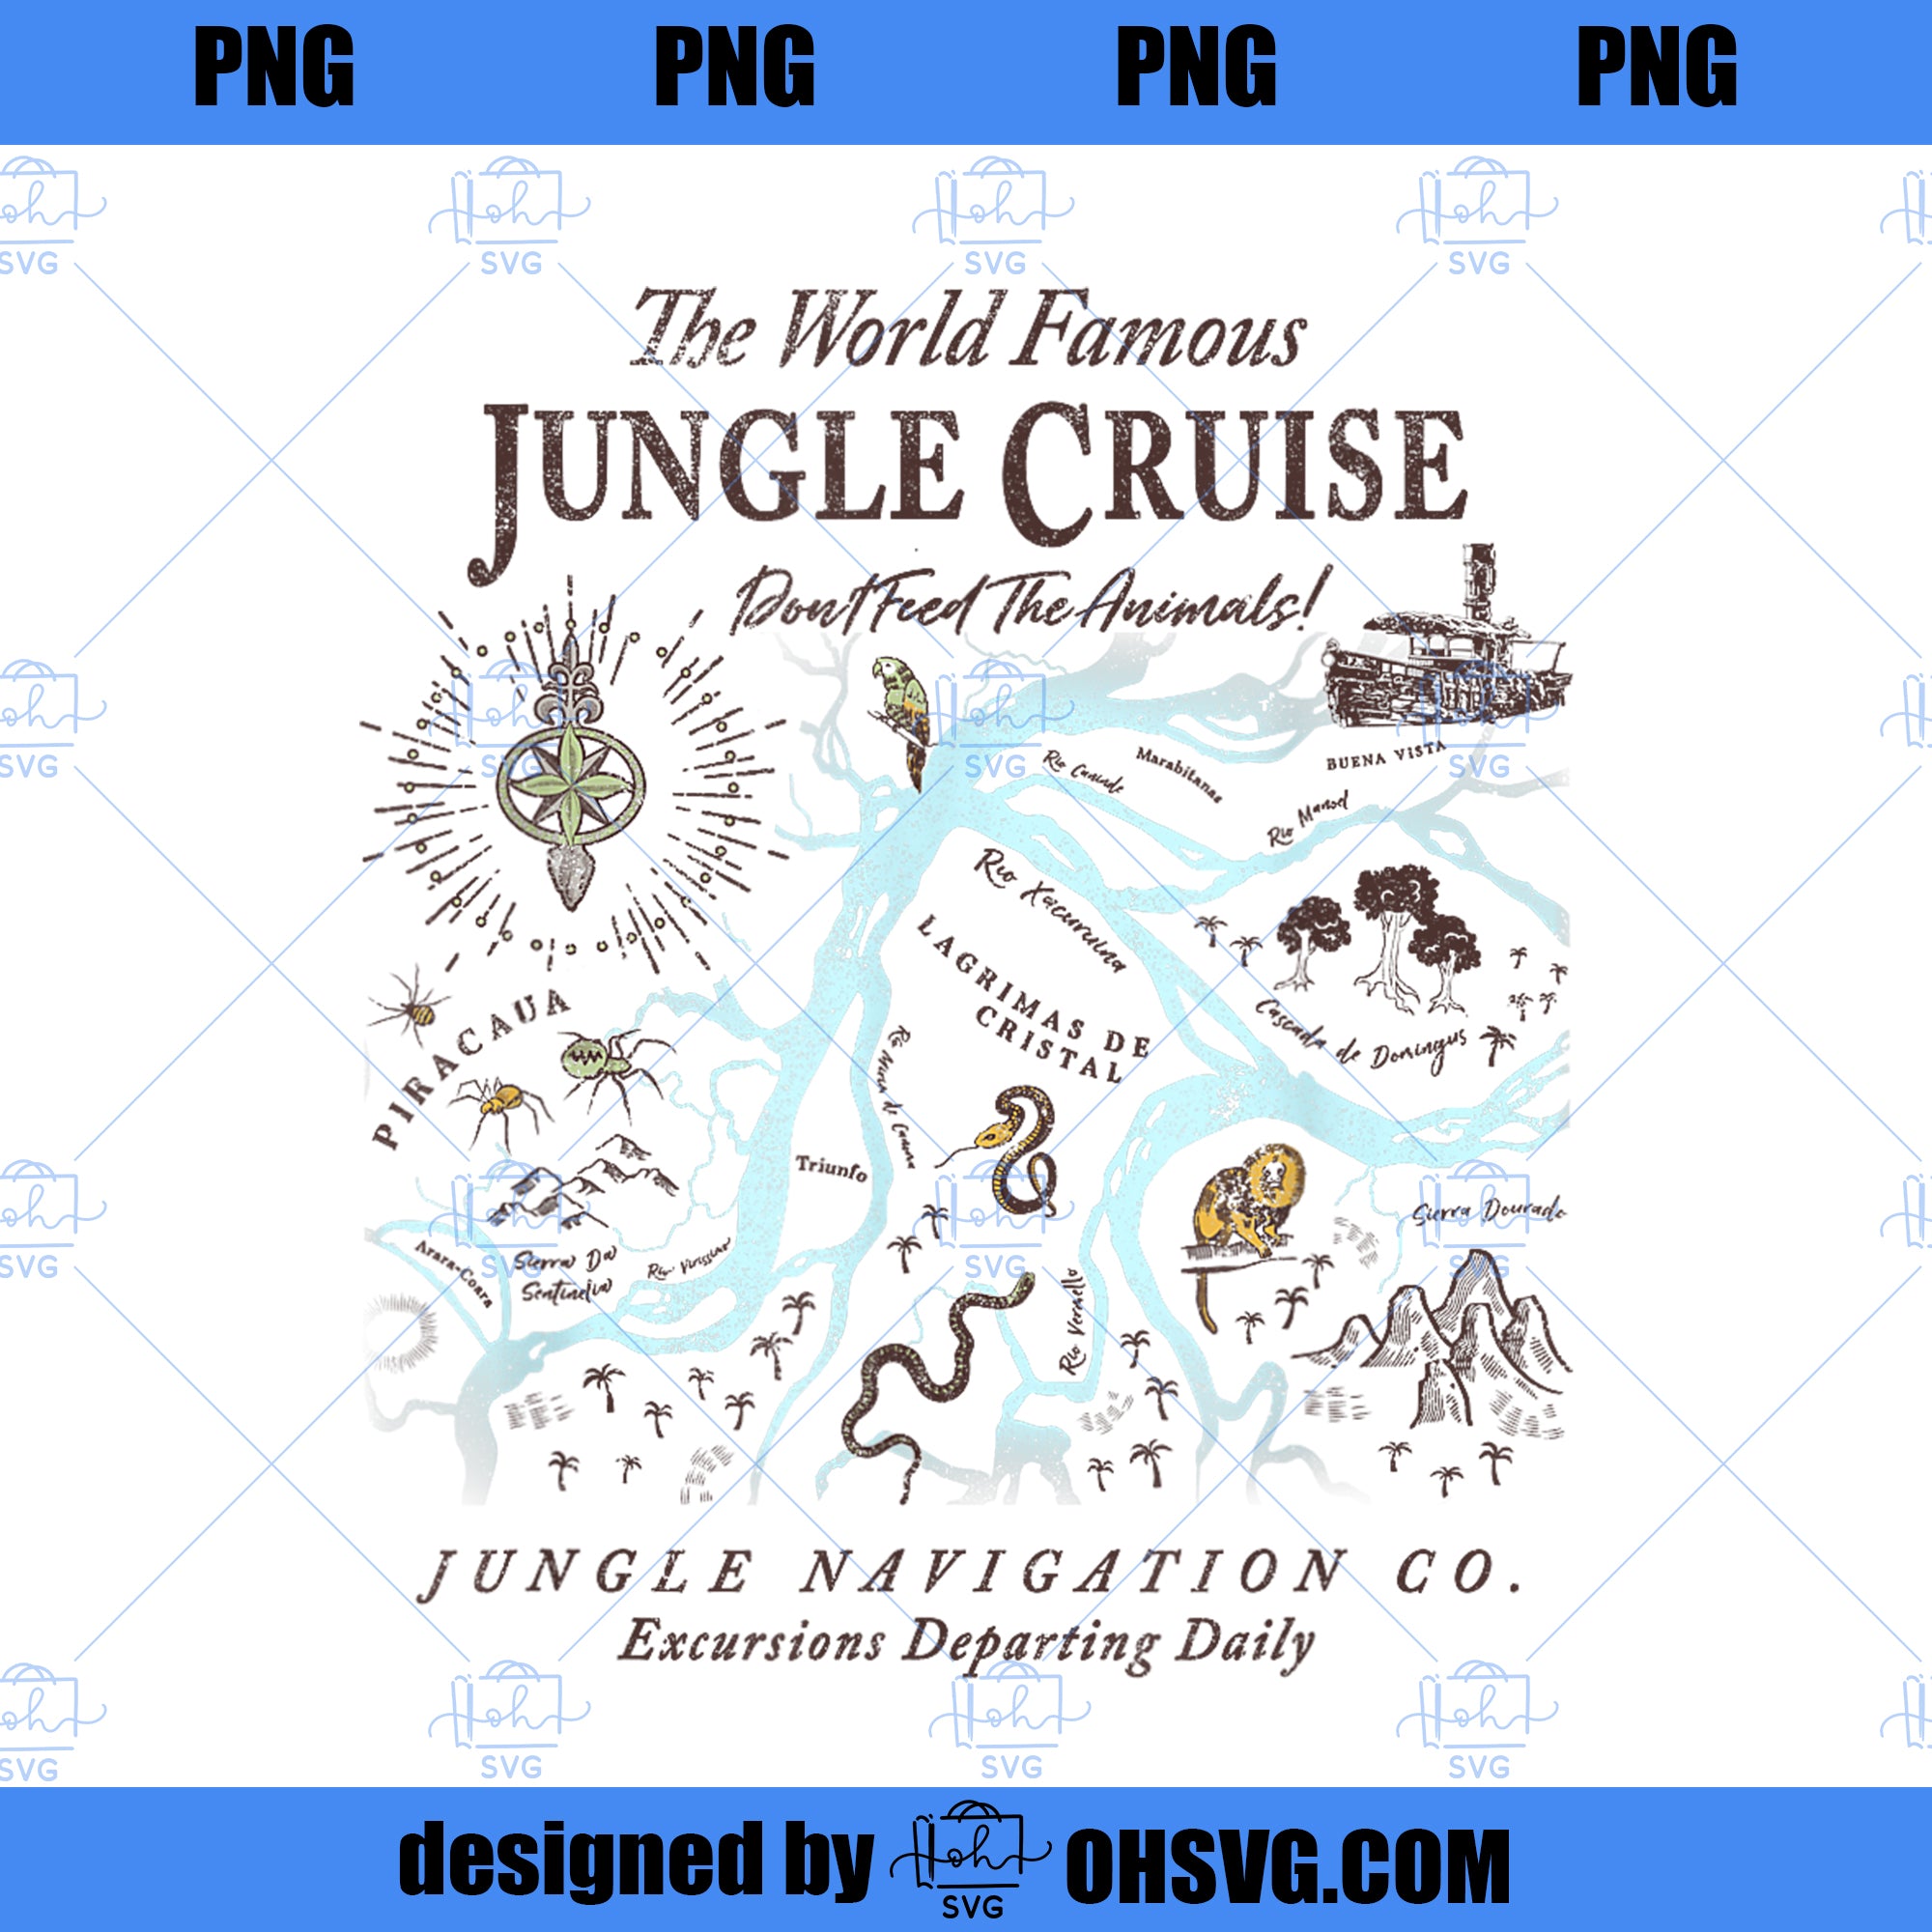 Disney Jungle Cruise World Famous Excursions Departing Daily PNG, Disney PNG, Disney Jungle PNG